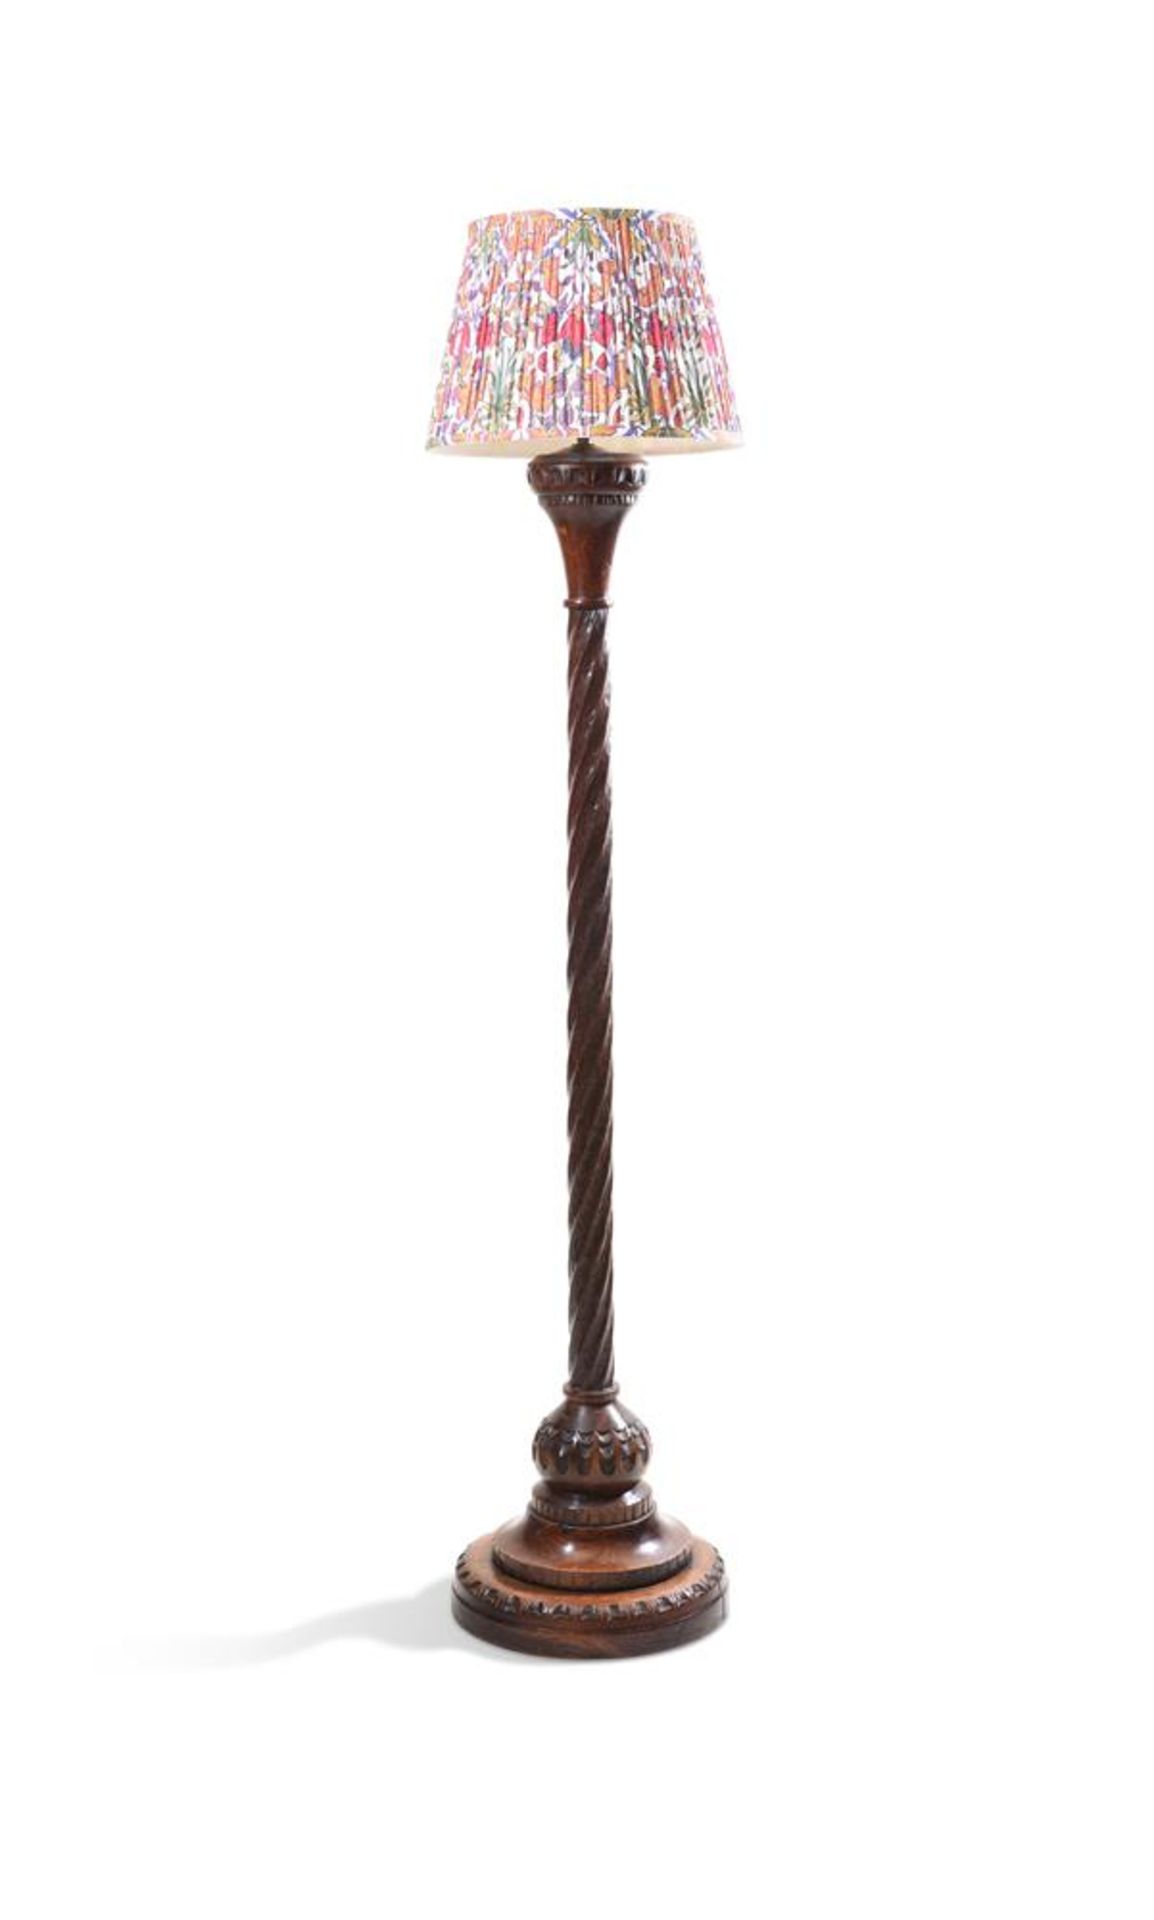 A PAIR OF CARVED OAK STANDARD LAMPS, LATE 19TH OR EARLY 20TH CENTURY - Image 2 of 5